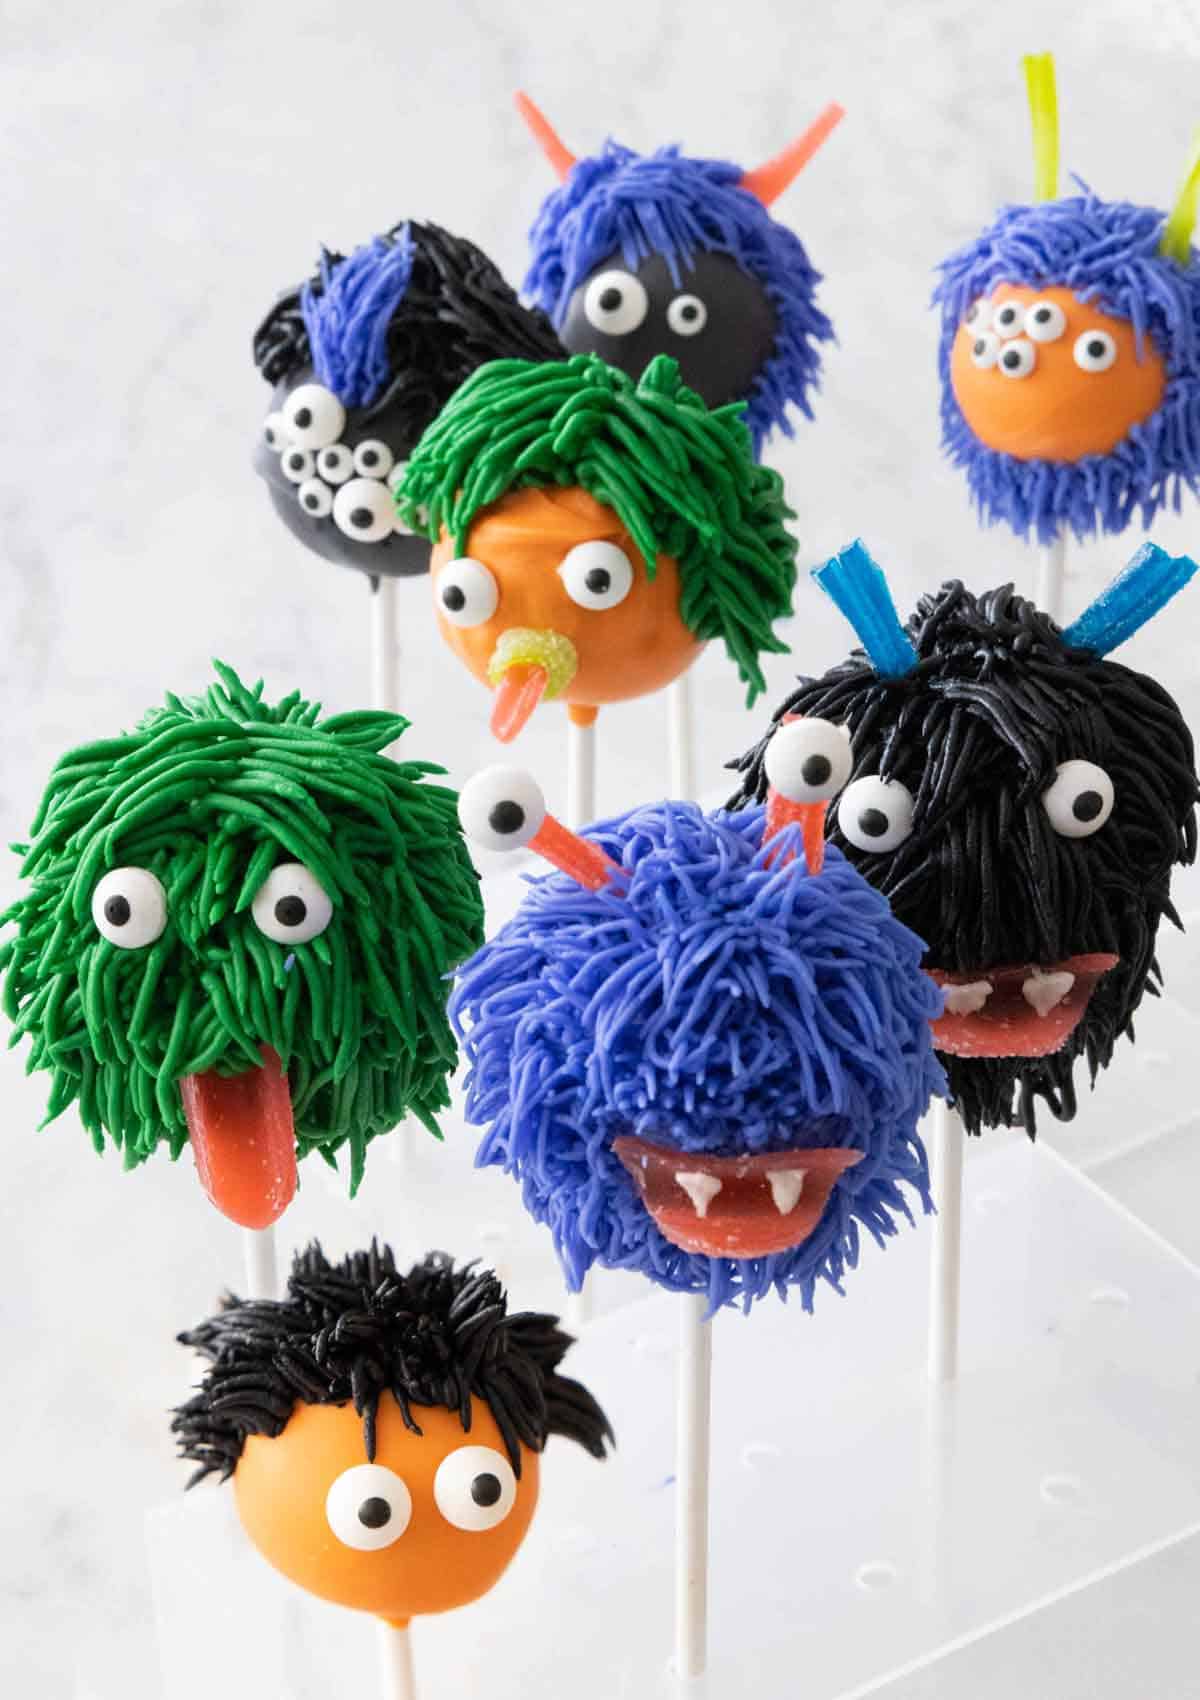 Eight Halloween cake pops decorated like monsters.